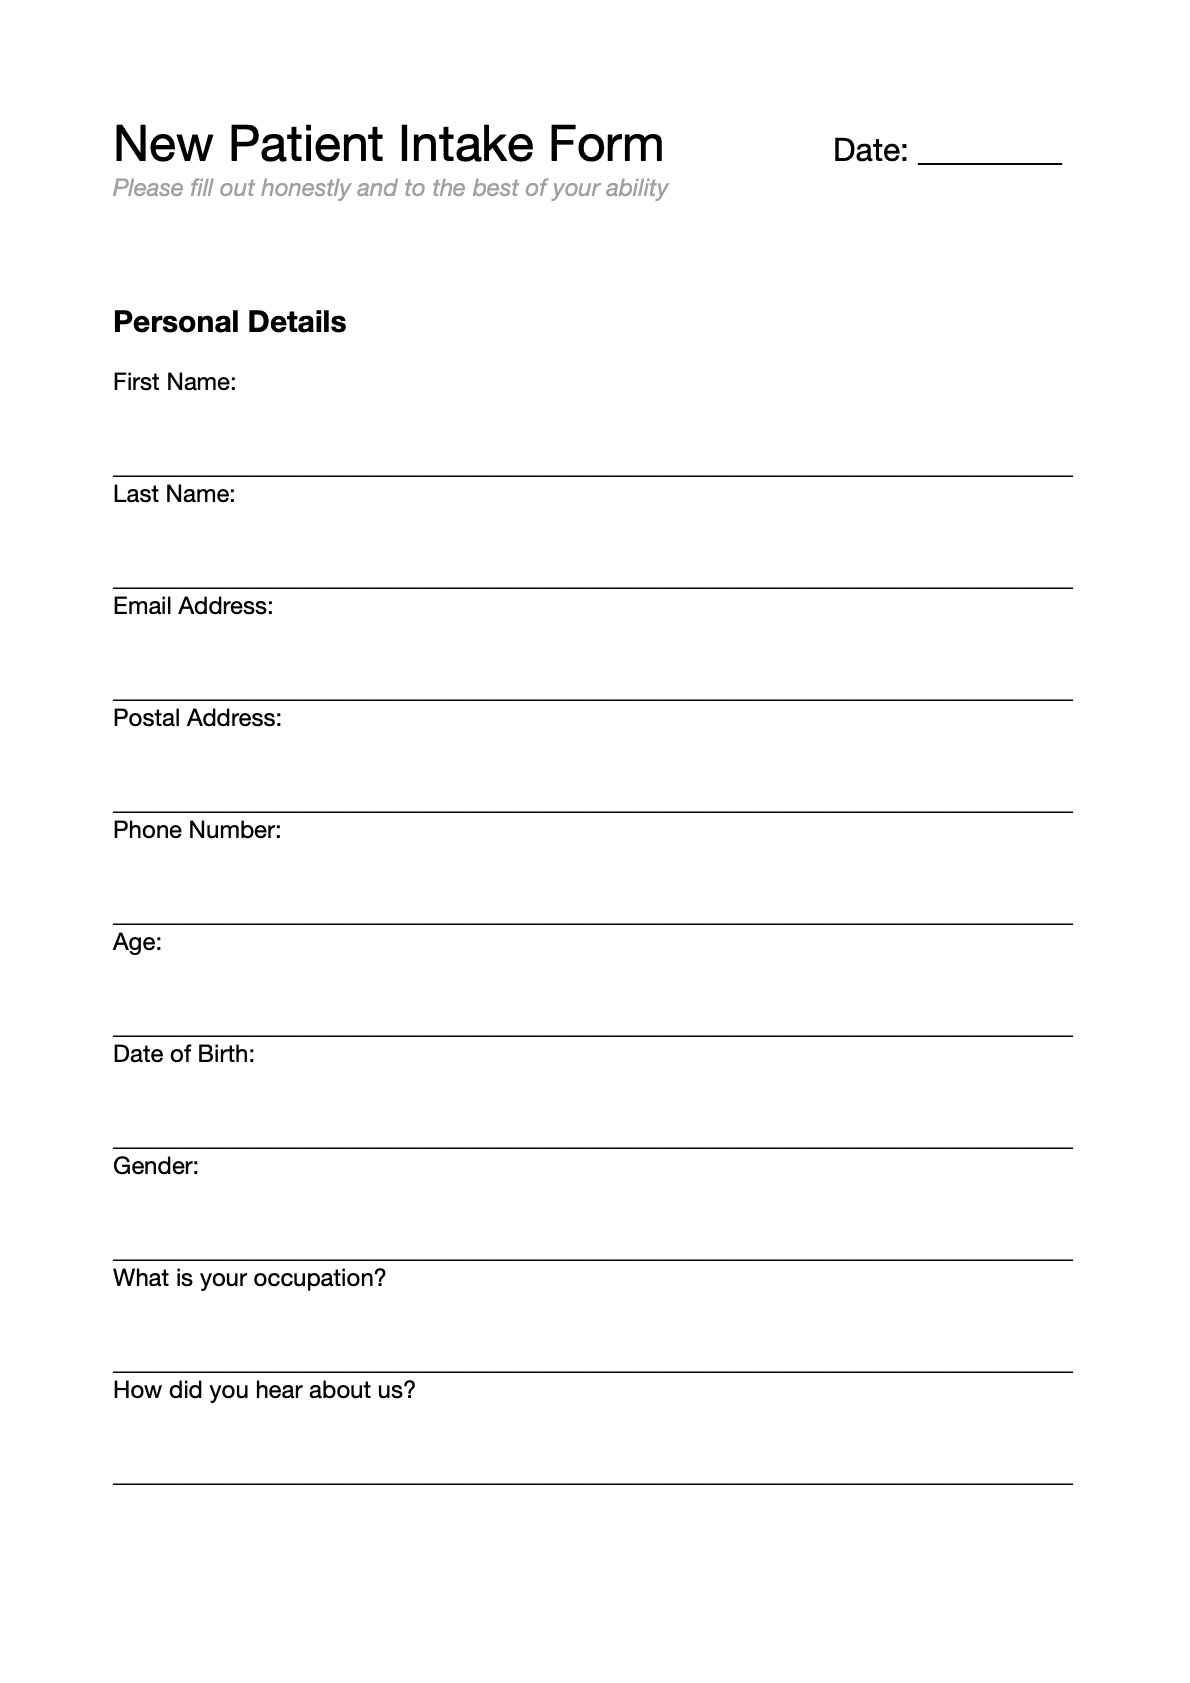 New Patient Intake Forms Printable 0269